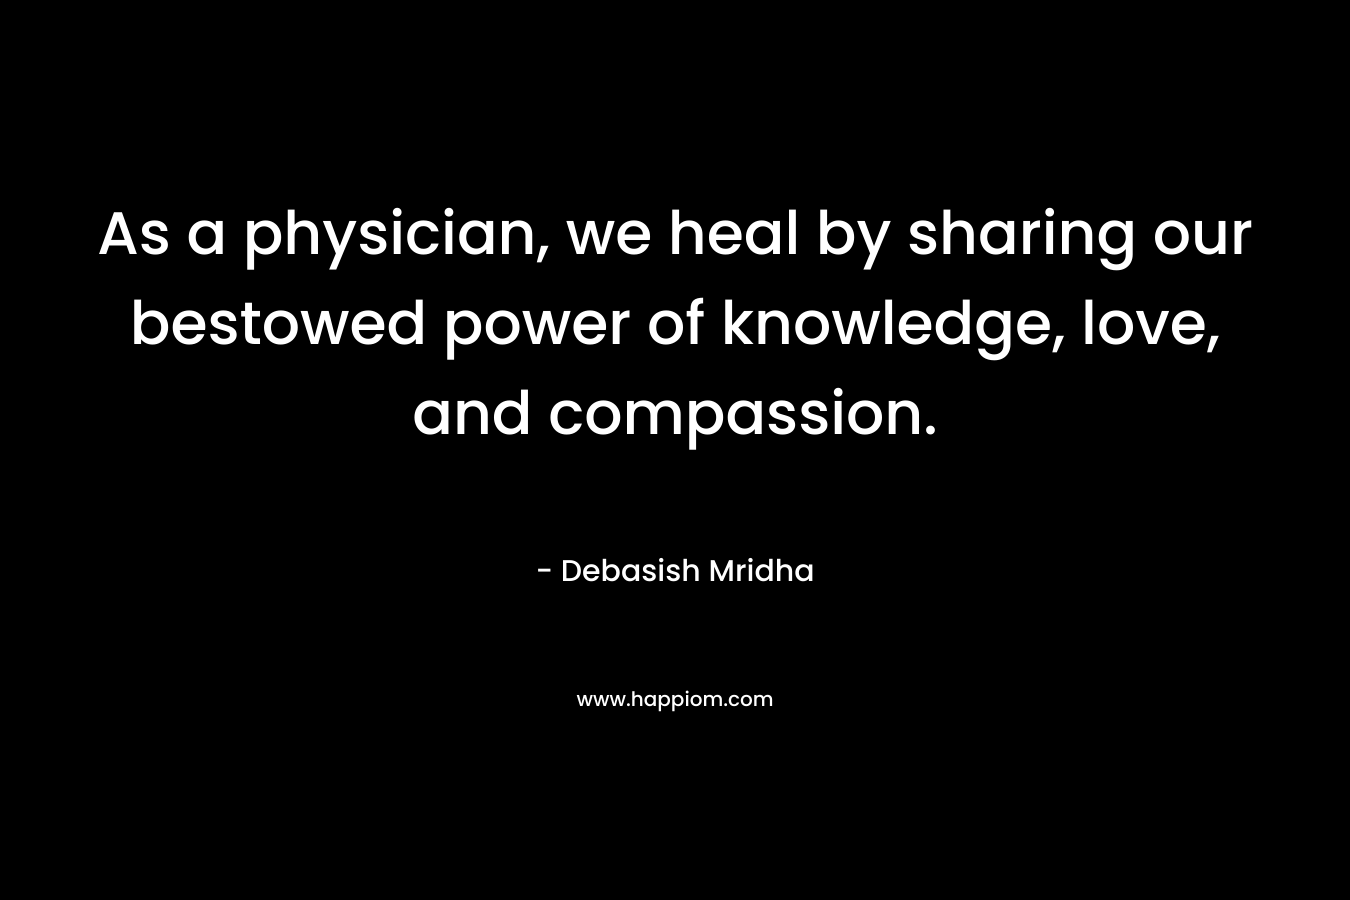 As a physician, we heal by sharing our bestowed power of knowledge, love, and compassion.